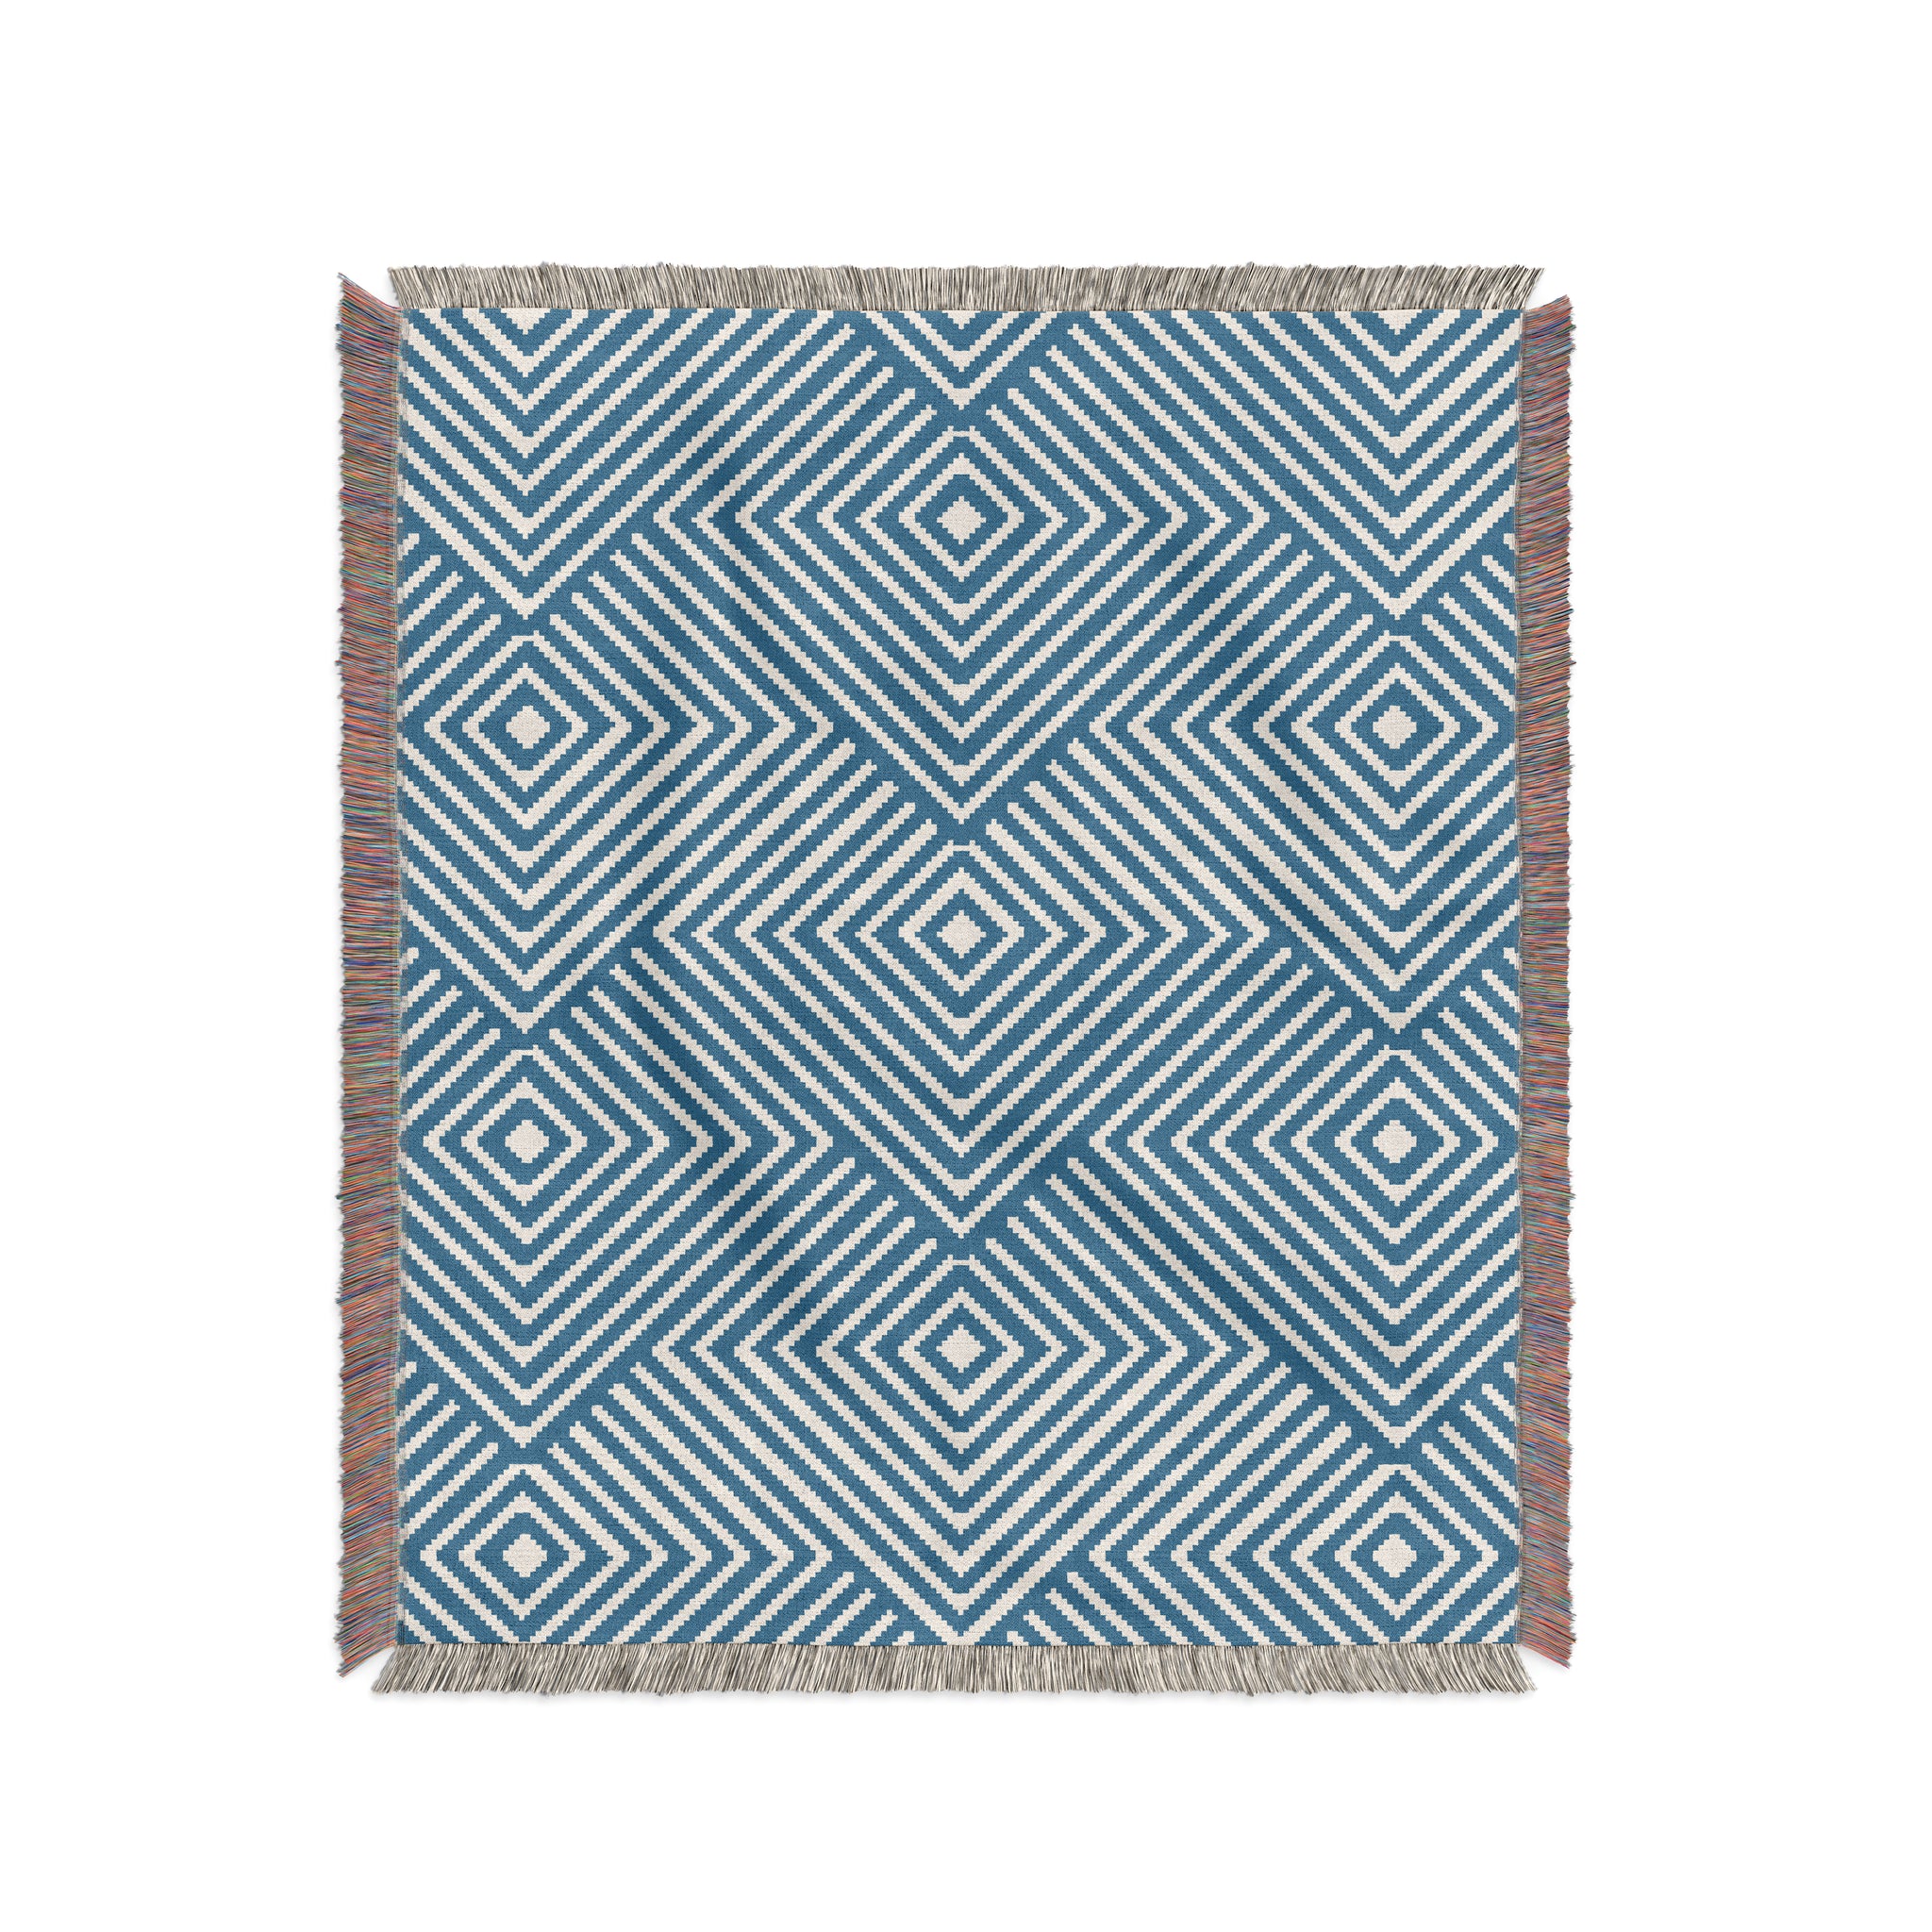 “PERMANENCE” ABSTRACT PATTERN THROW BLANKET (SLATE BLUE)